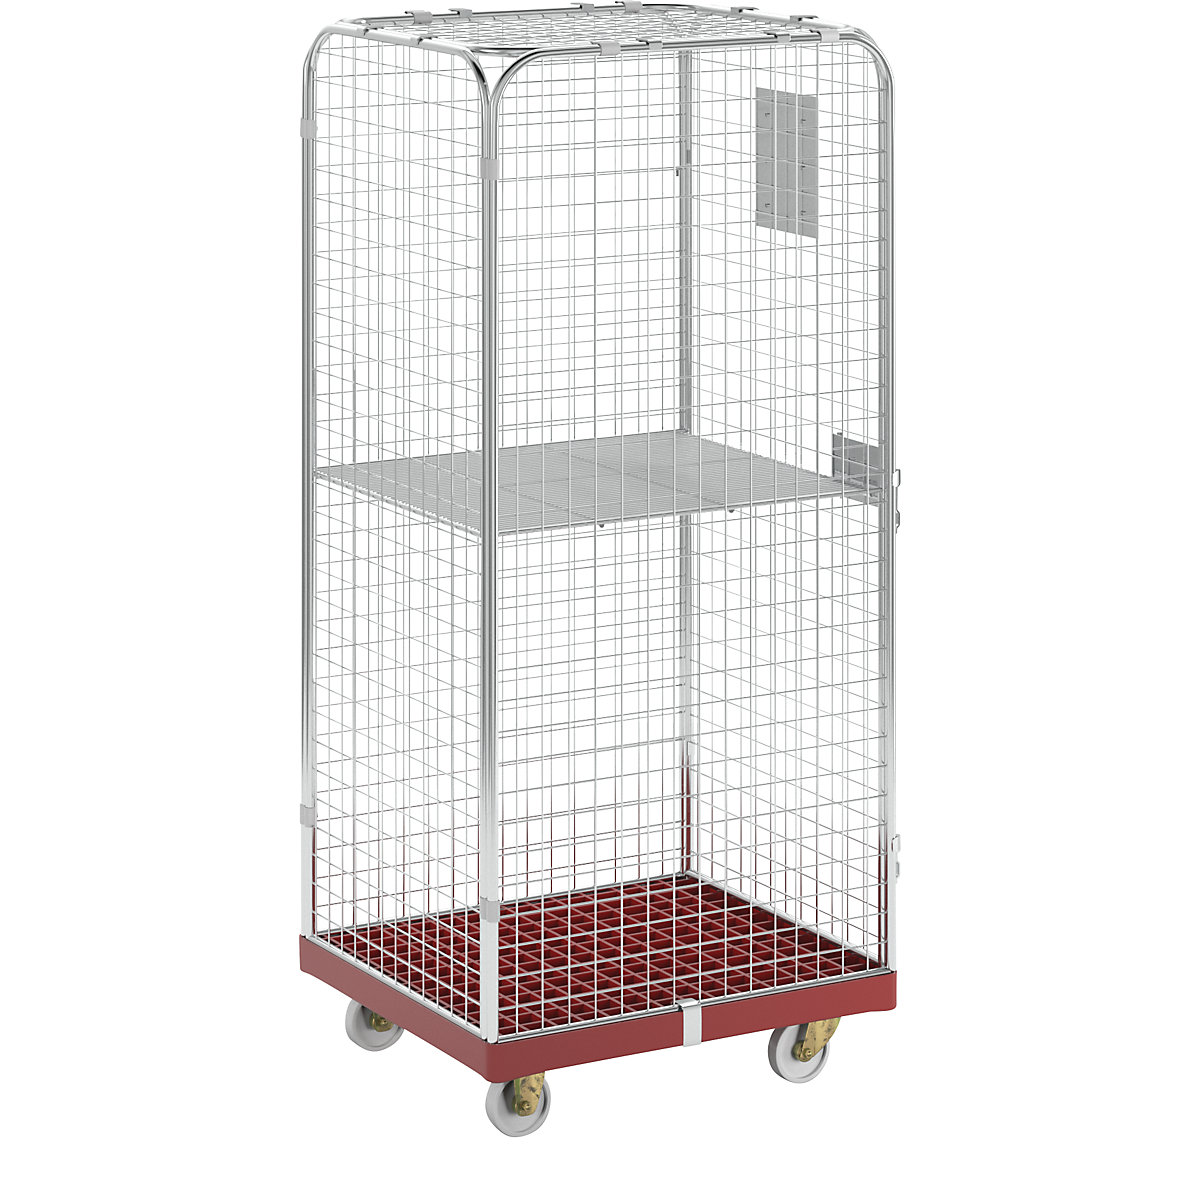 SAFE roll container, HxWxD 1800 x 720 x 810 mm, red transport dolly-10